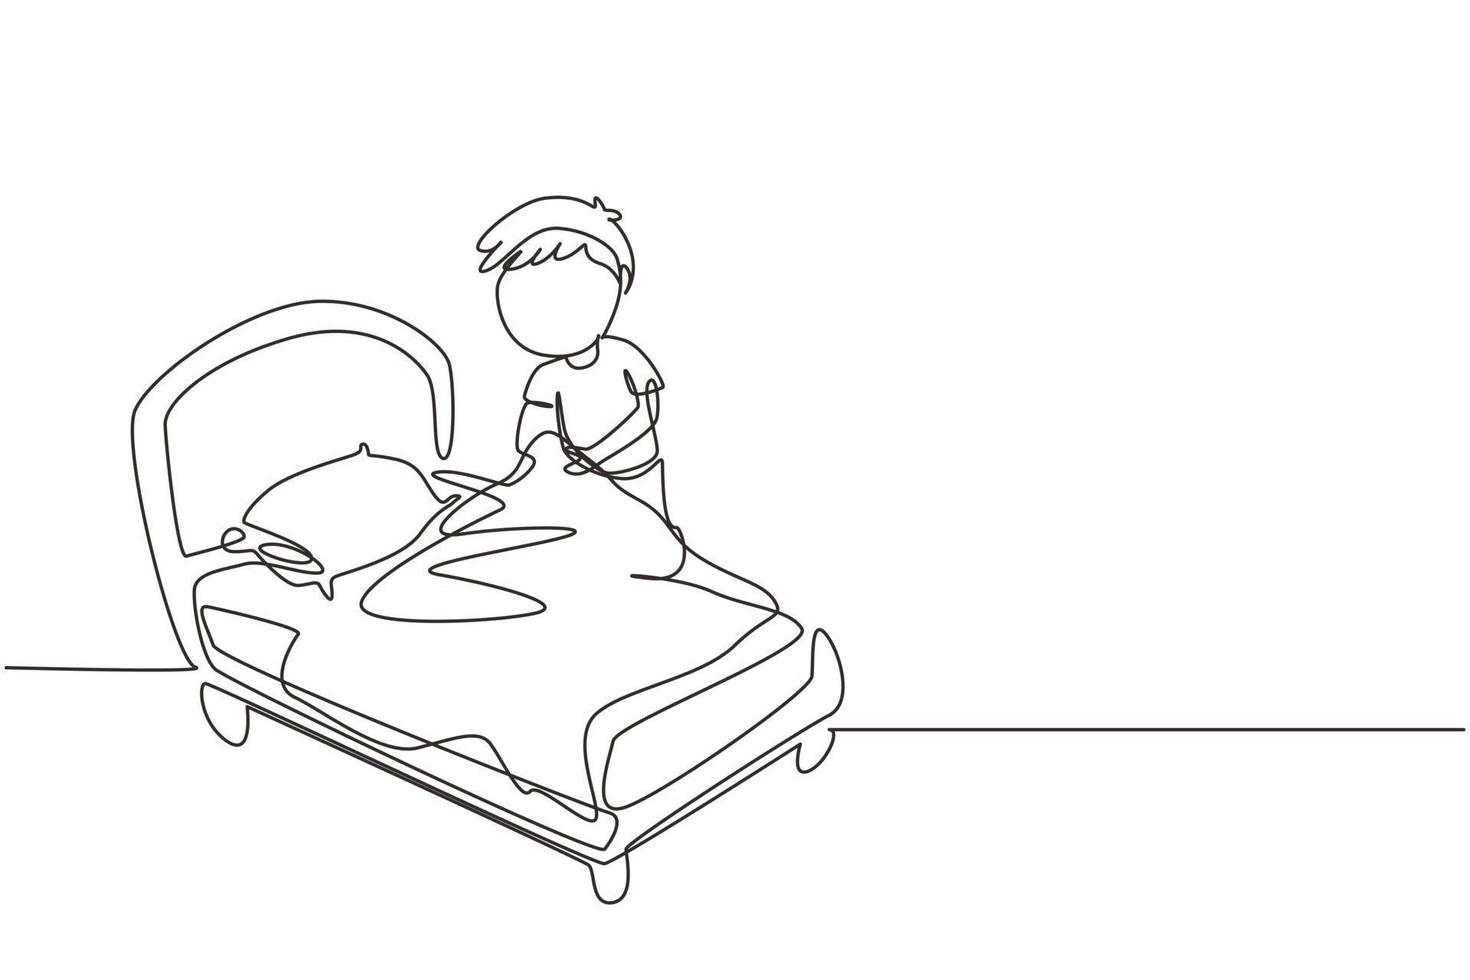 Single continuous line drawing little boy making the bed. Kids doing housework chores at home concept. Kids routine after waking up to tidy up the bed. One line draw graphic design vector illustration